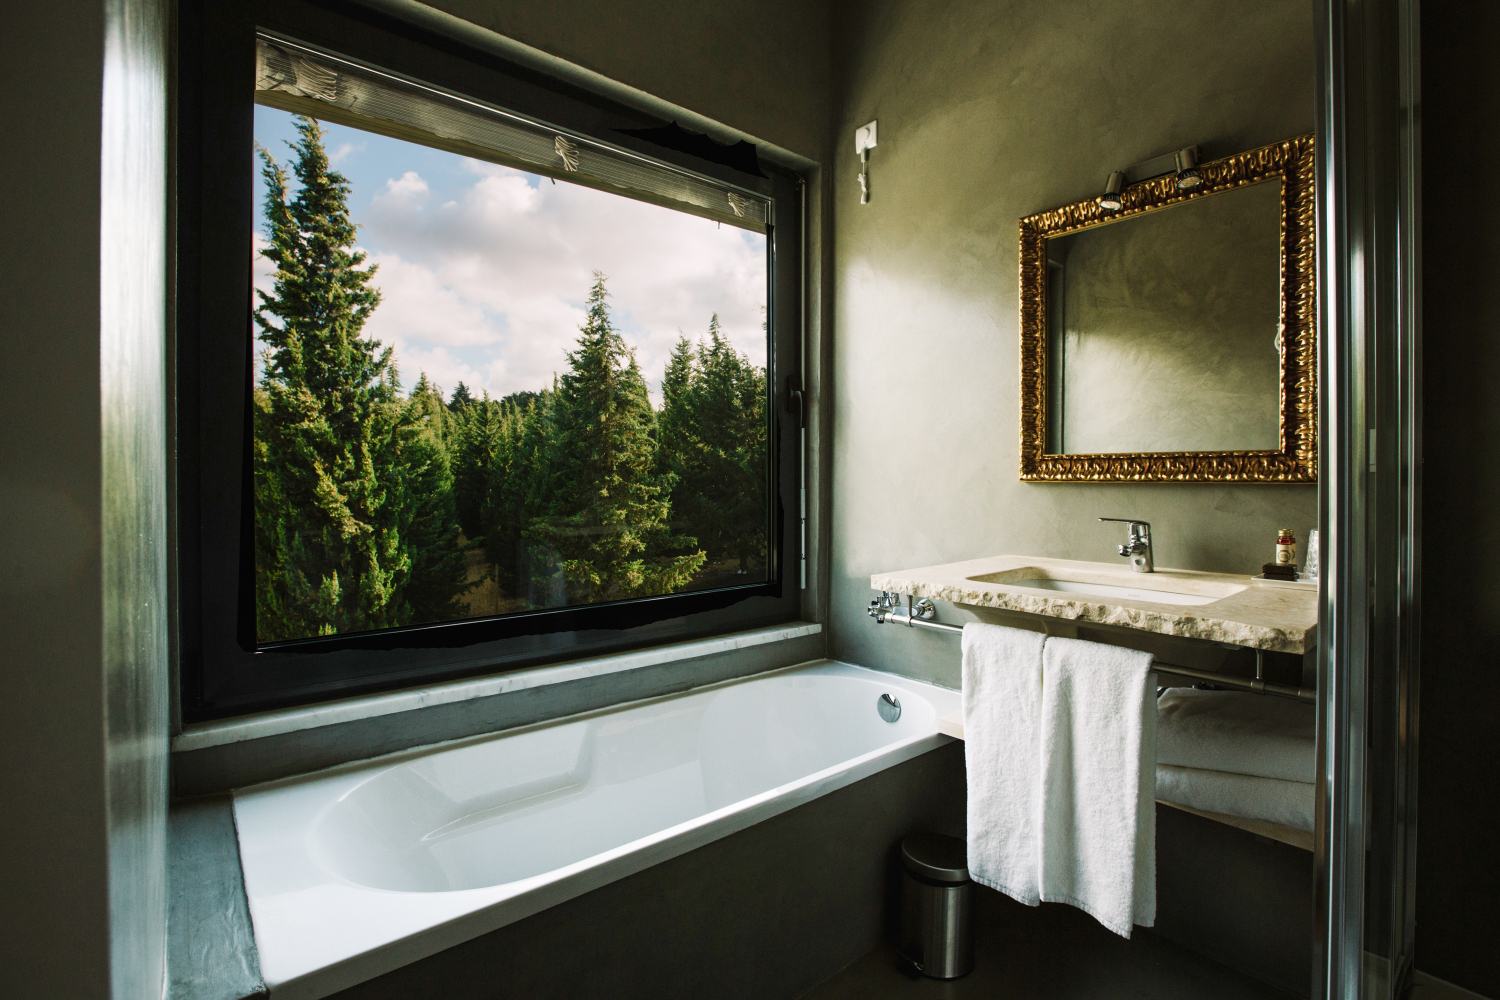 A bath beside a large window looking out onto lush green trees